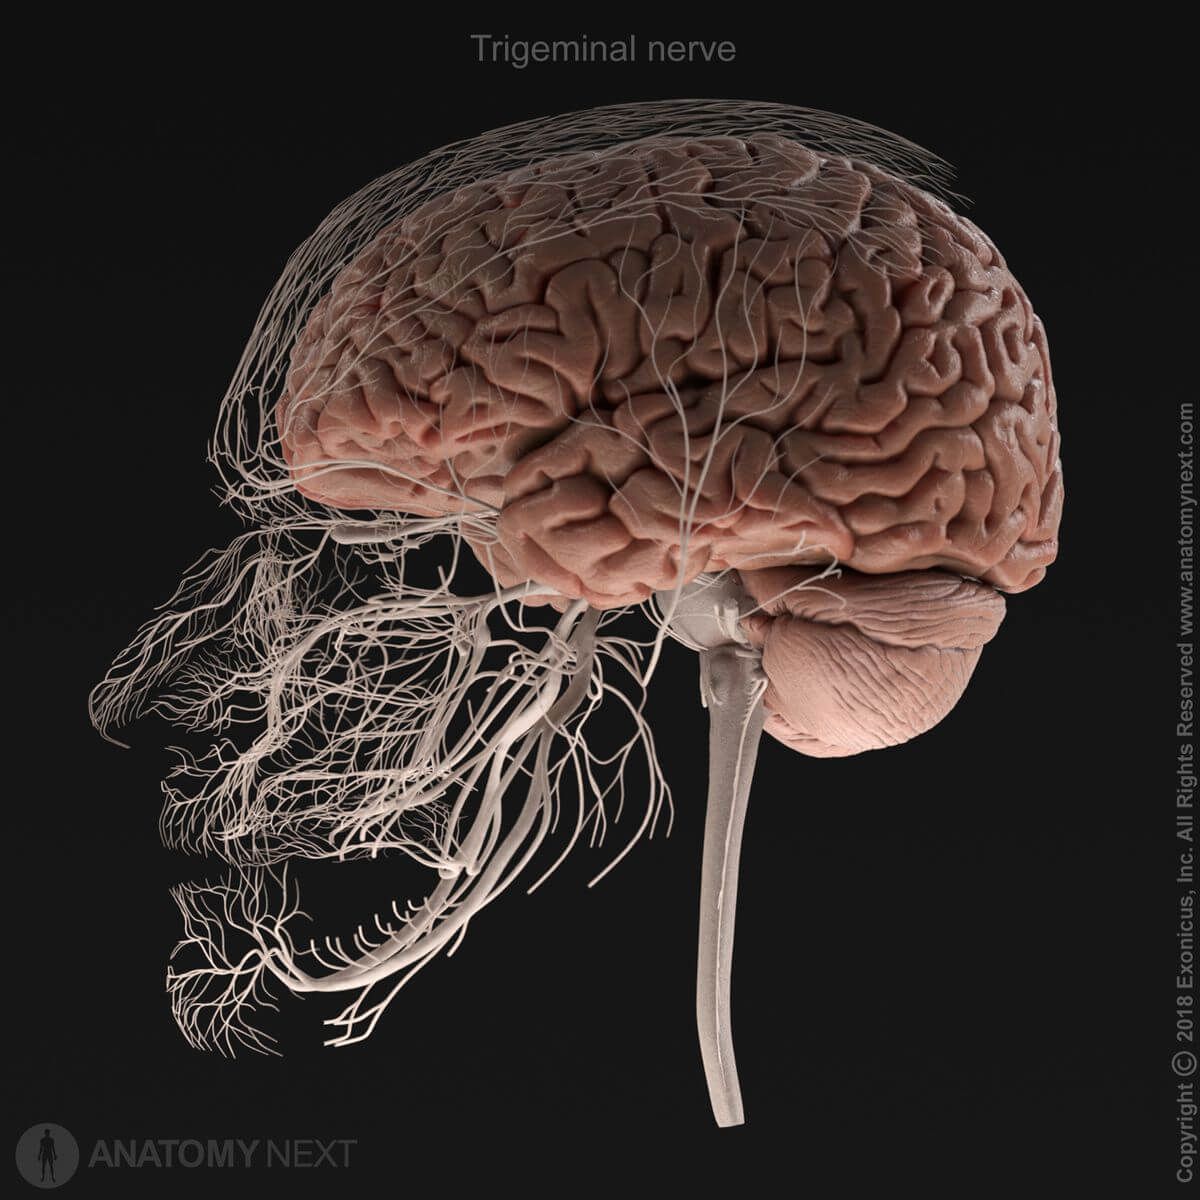 Trigeminal nerve and distribution of its branches, fifth cranial nerve, CN V, in relation to brain